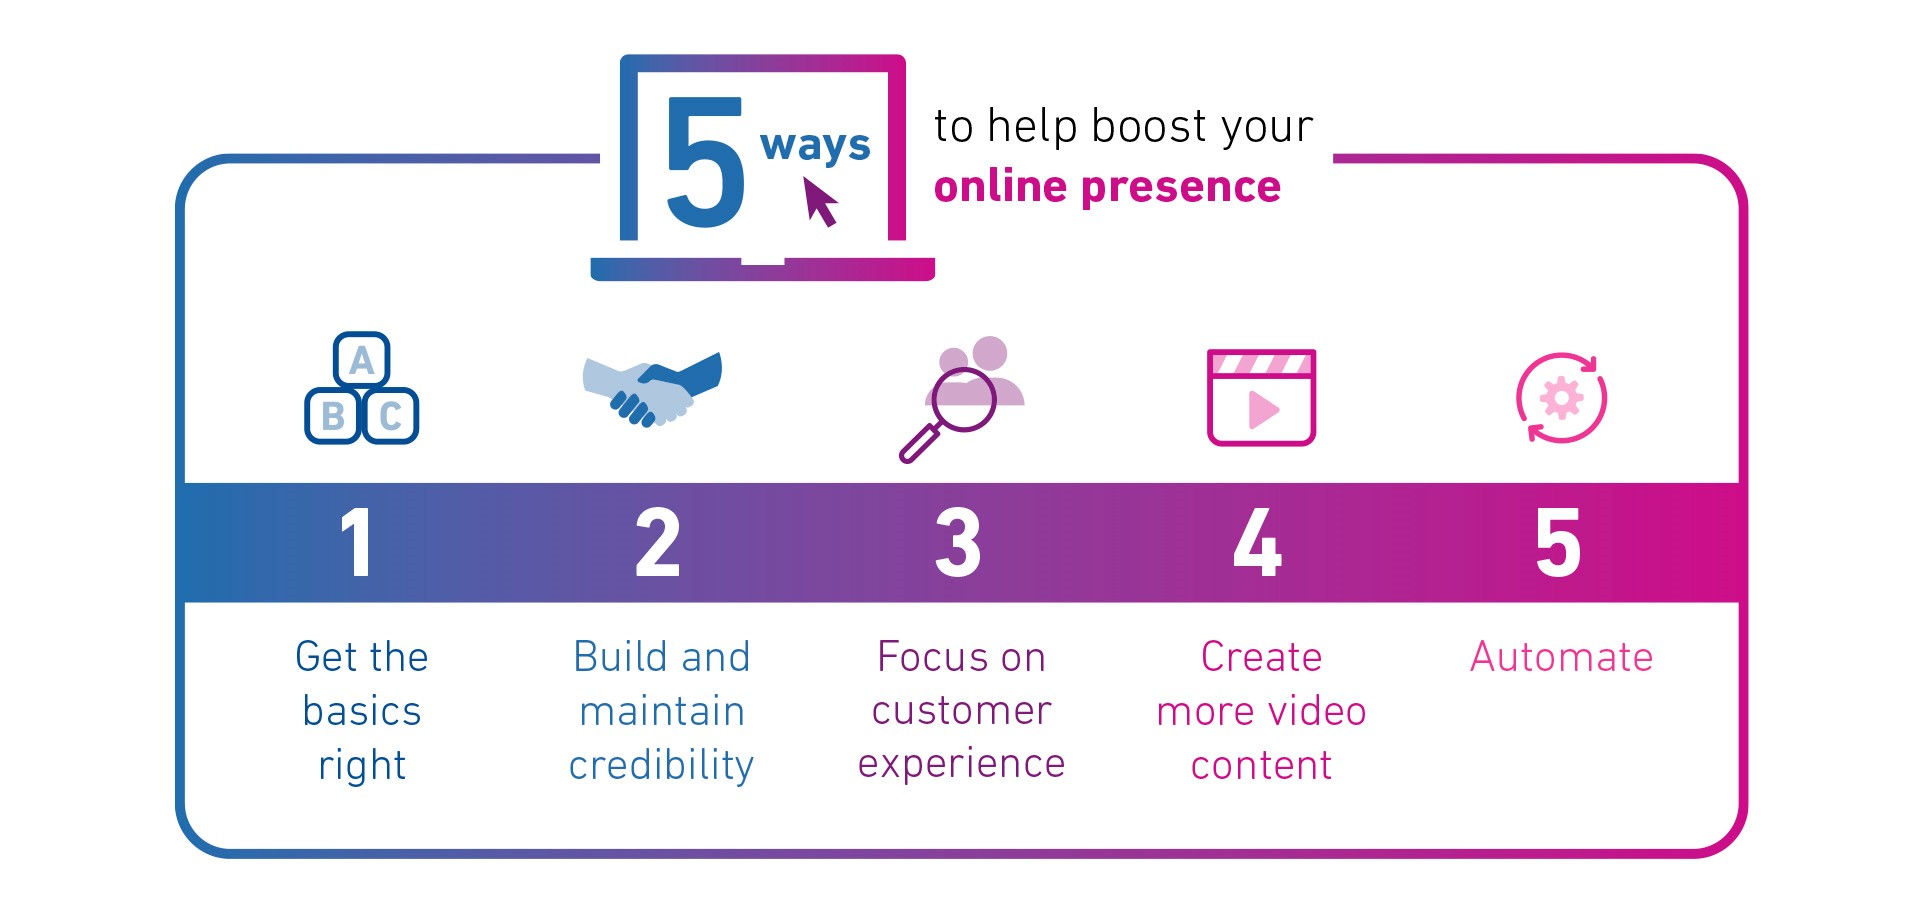 Infographic showing 5 ways to boost your business' online presence